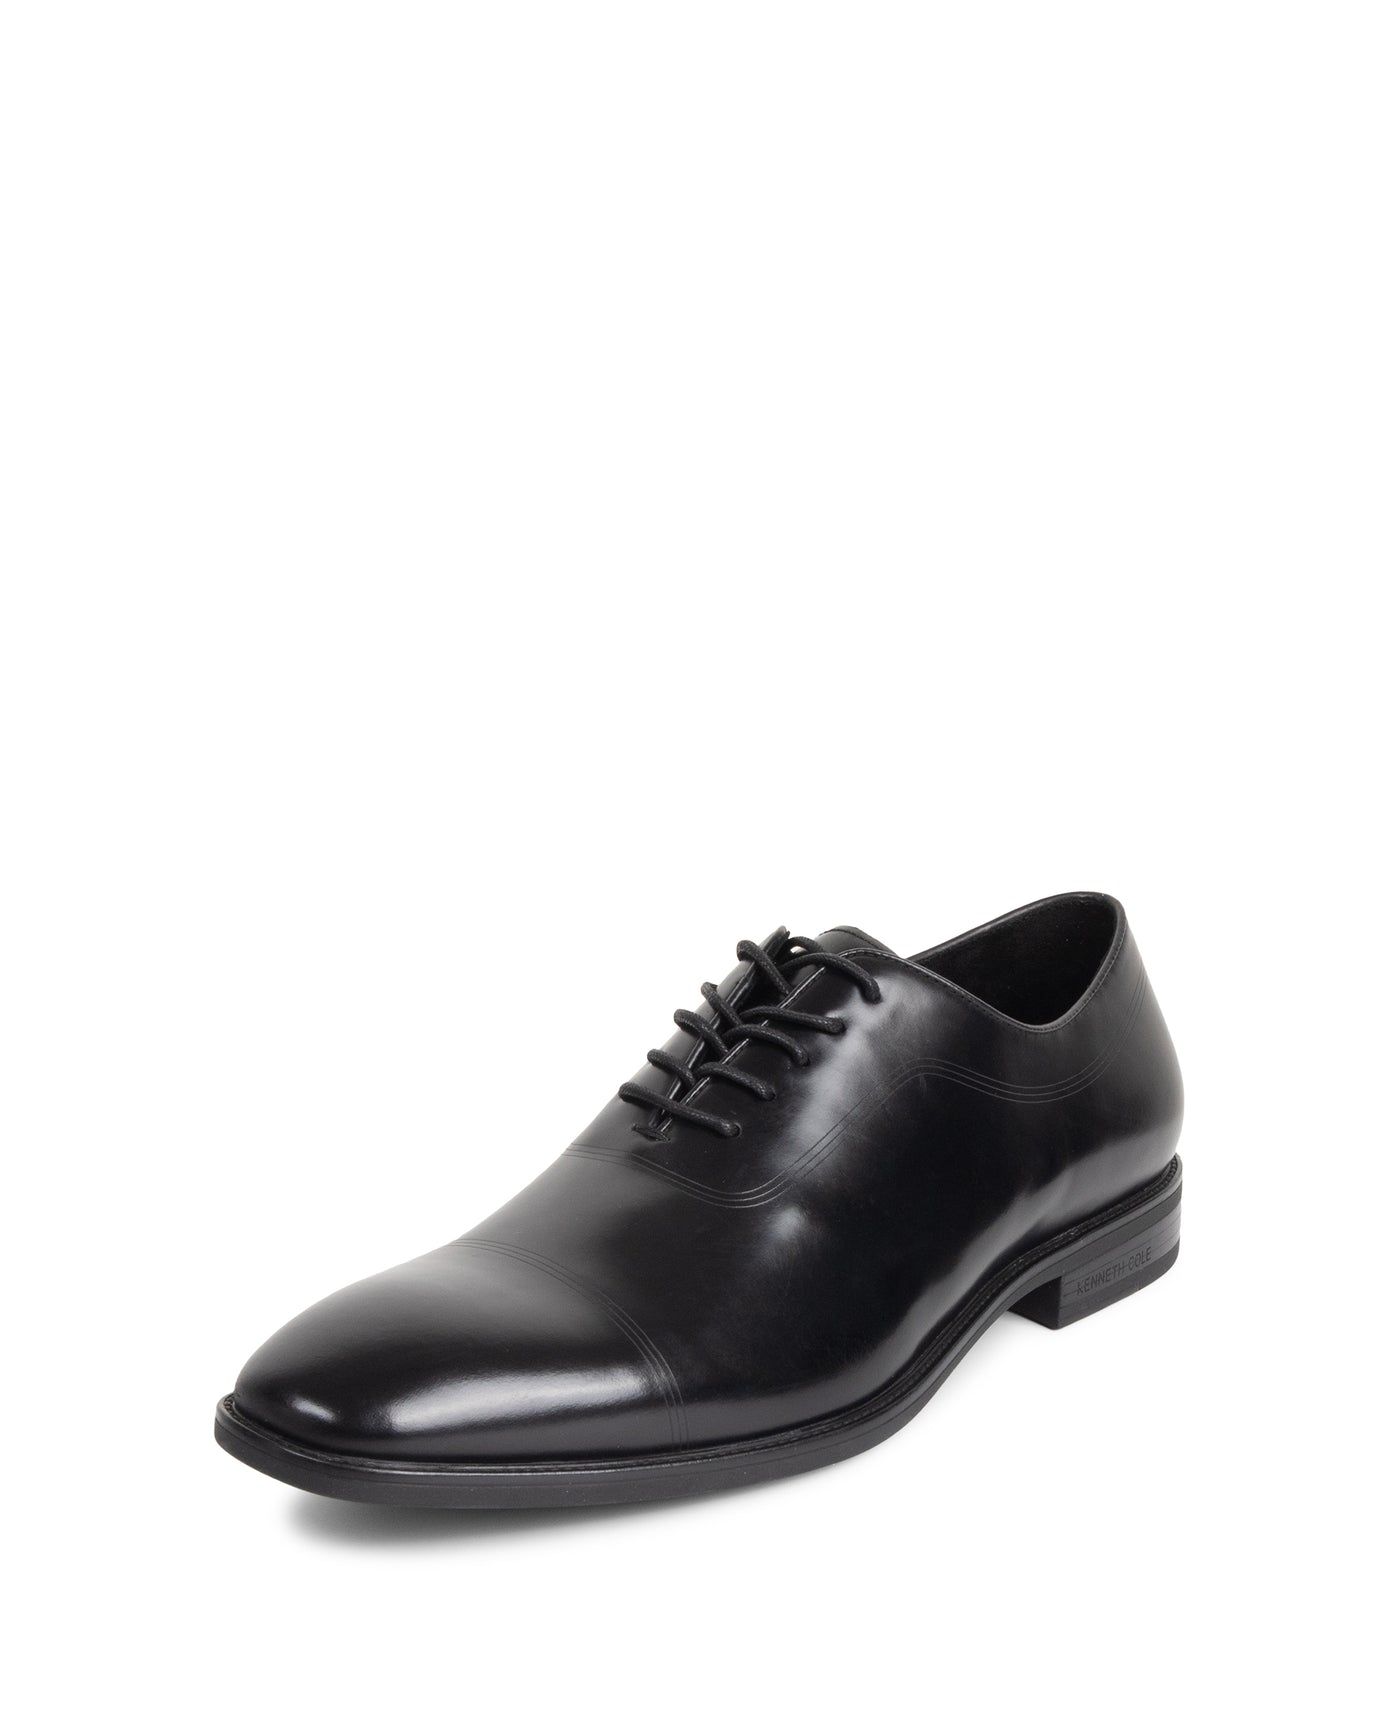 Kenneth Cole New York Men's Ticketpod Lace Up Leather Dress Shoes